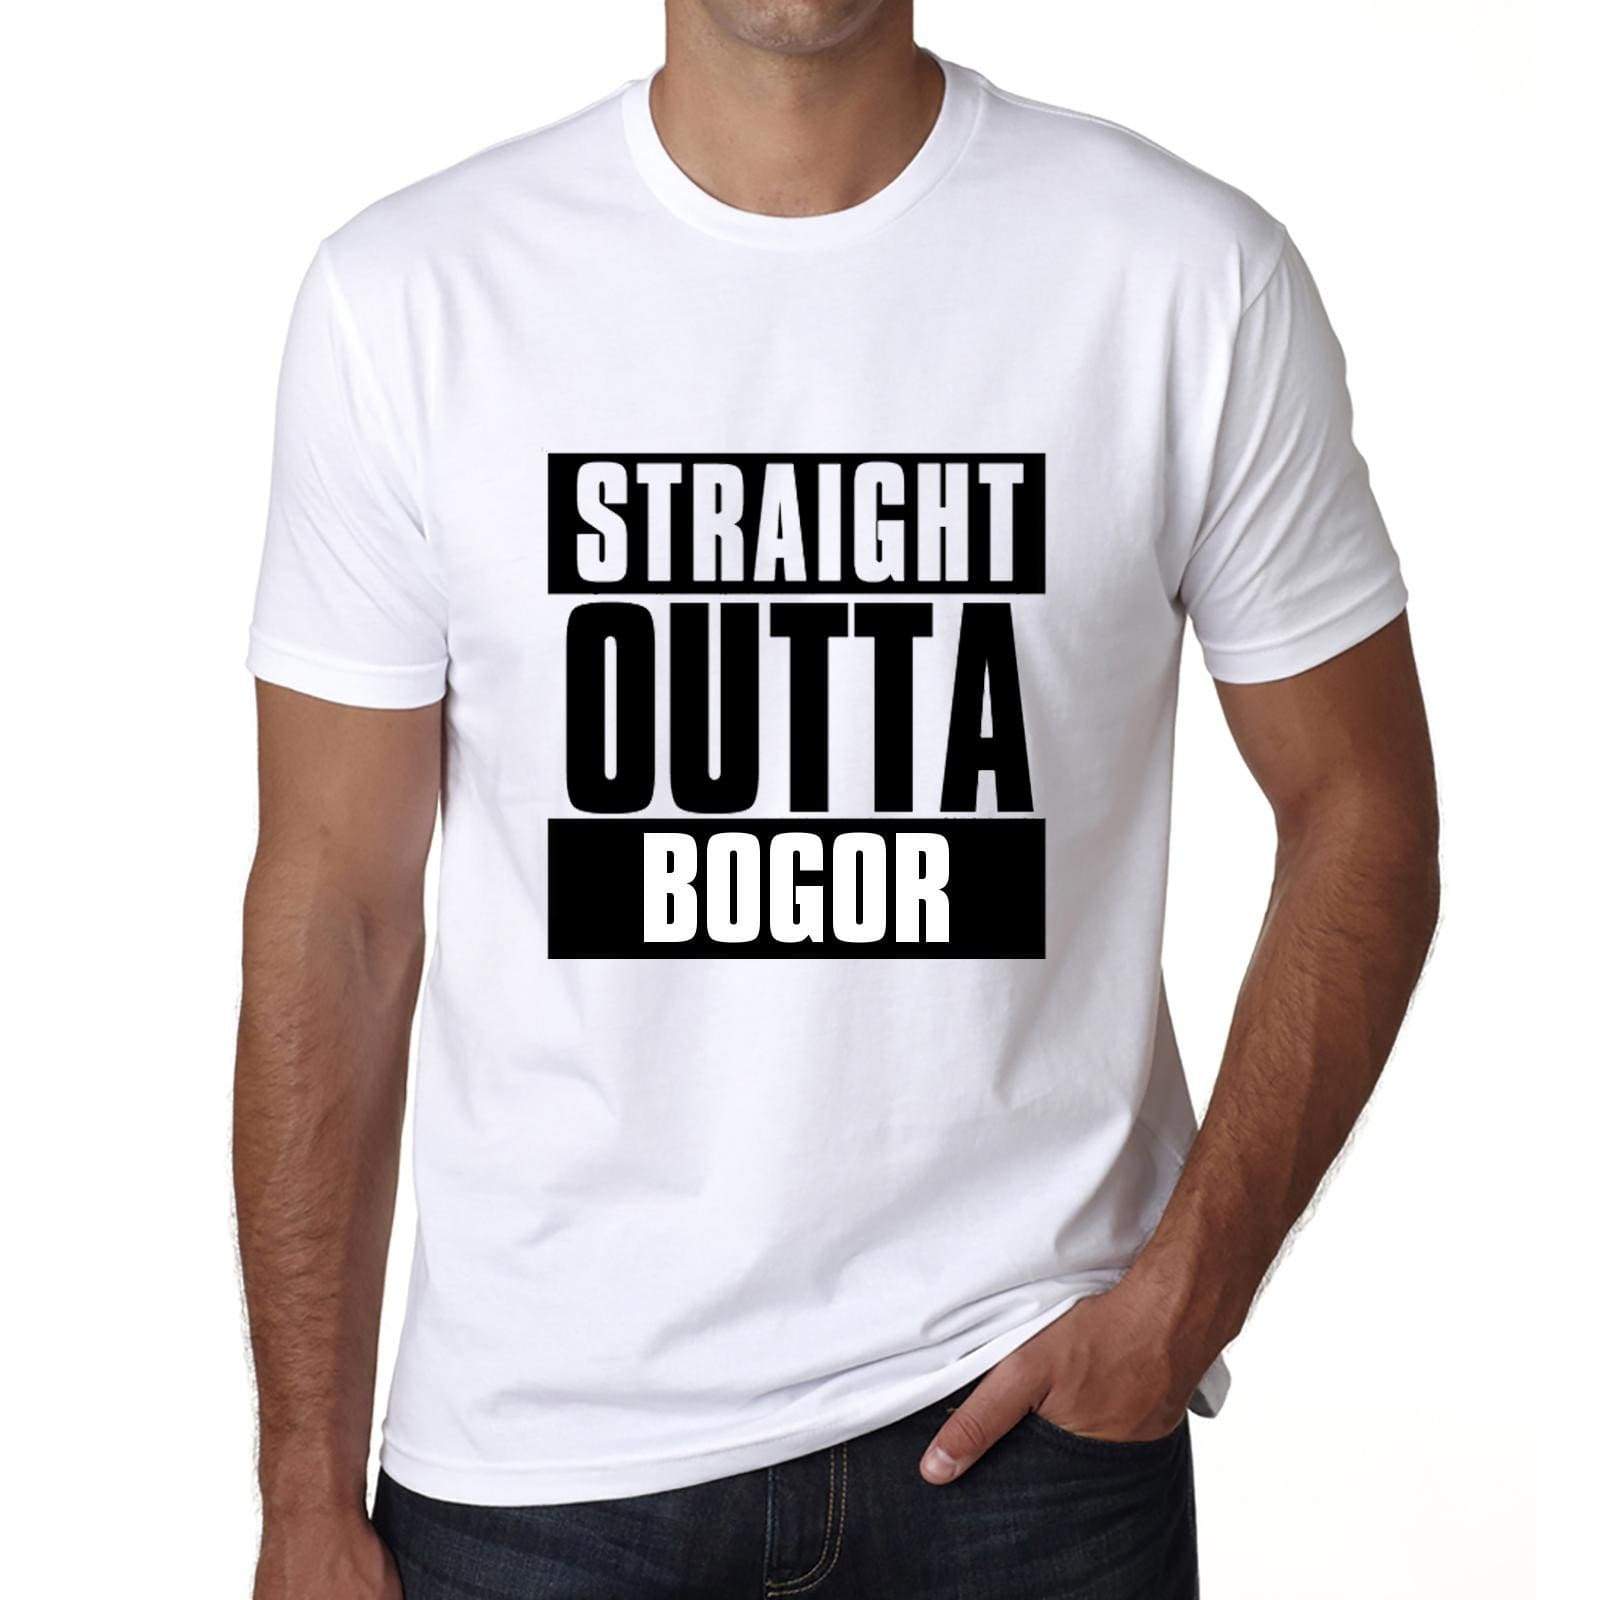 Straight Outta Bogor Mens Short Sleeve Round Neck T-Shirt 00027 - White / S - Casual